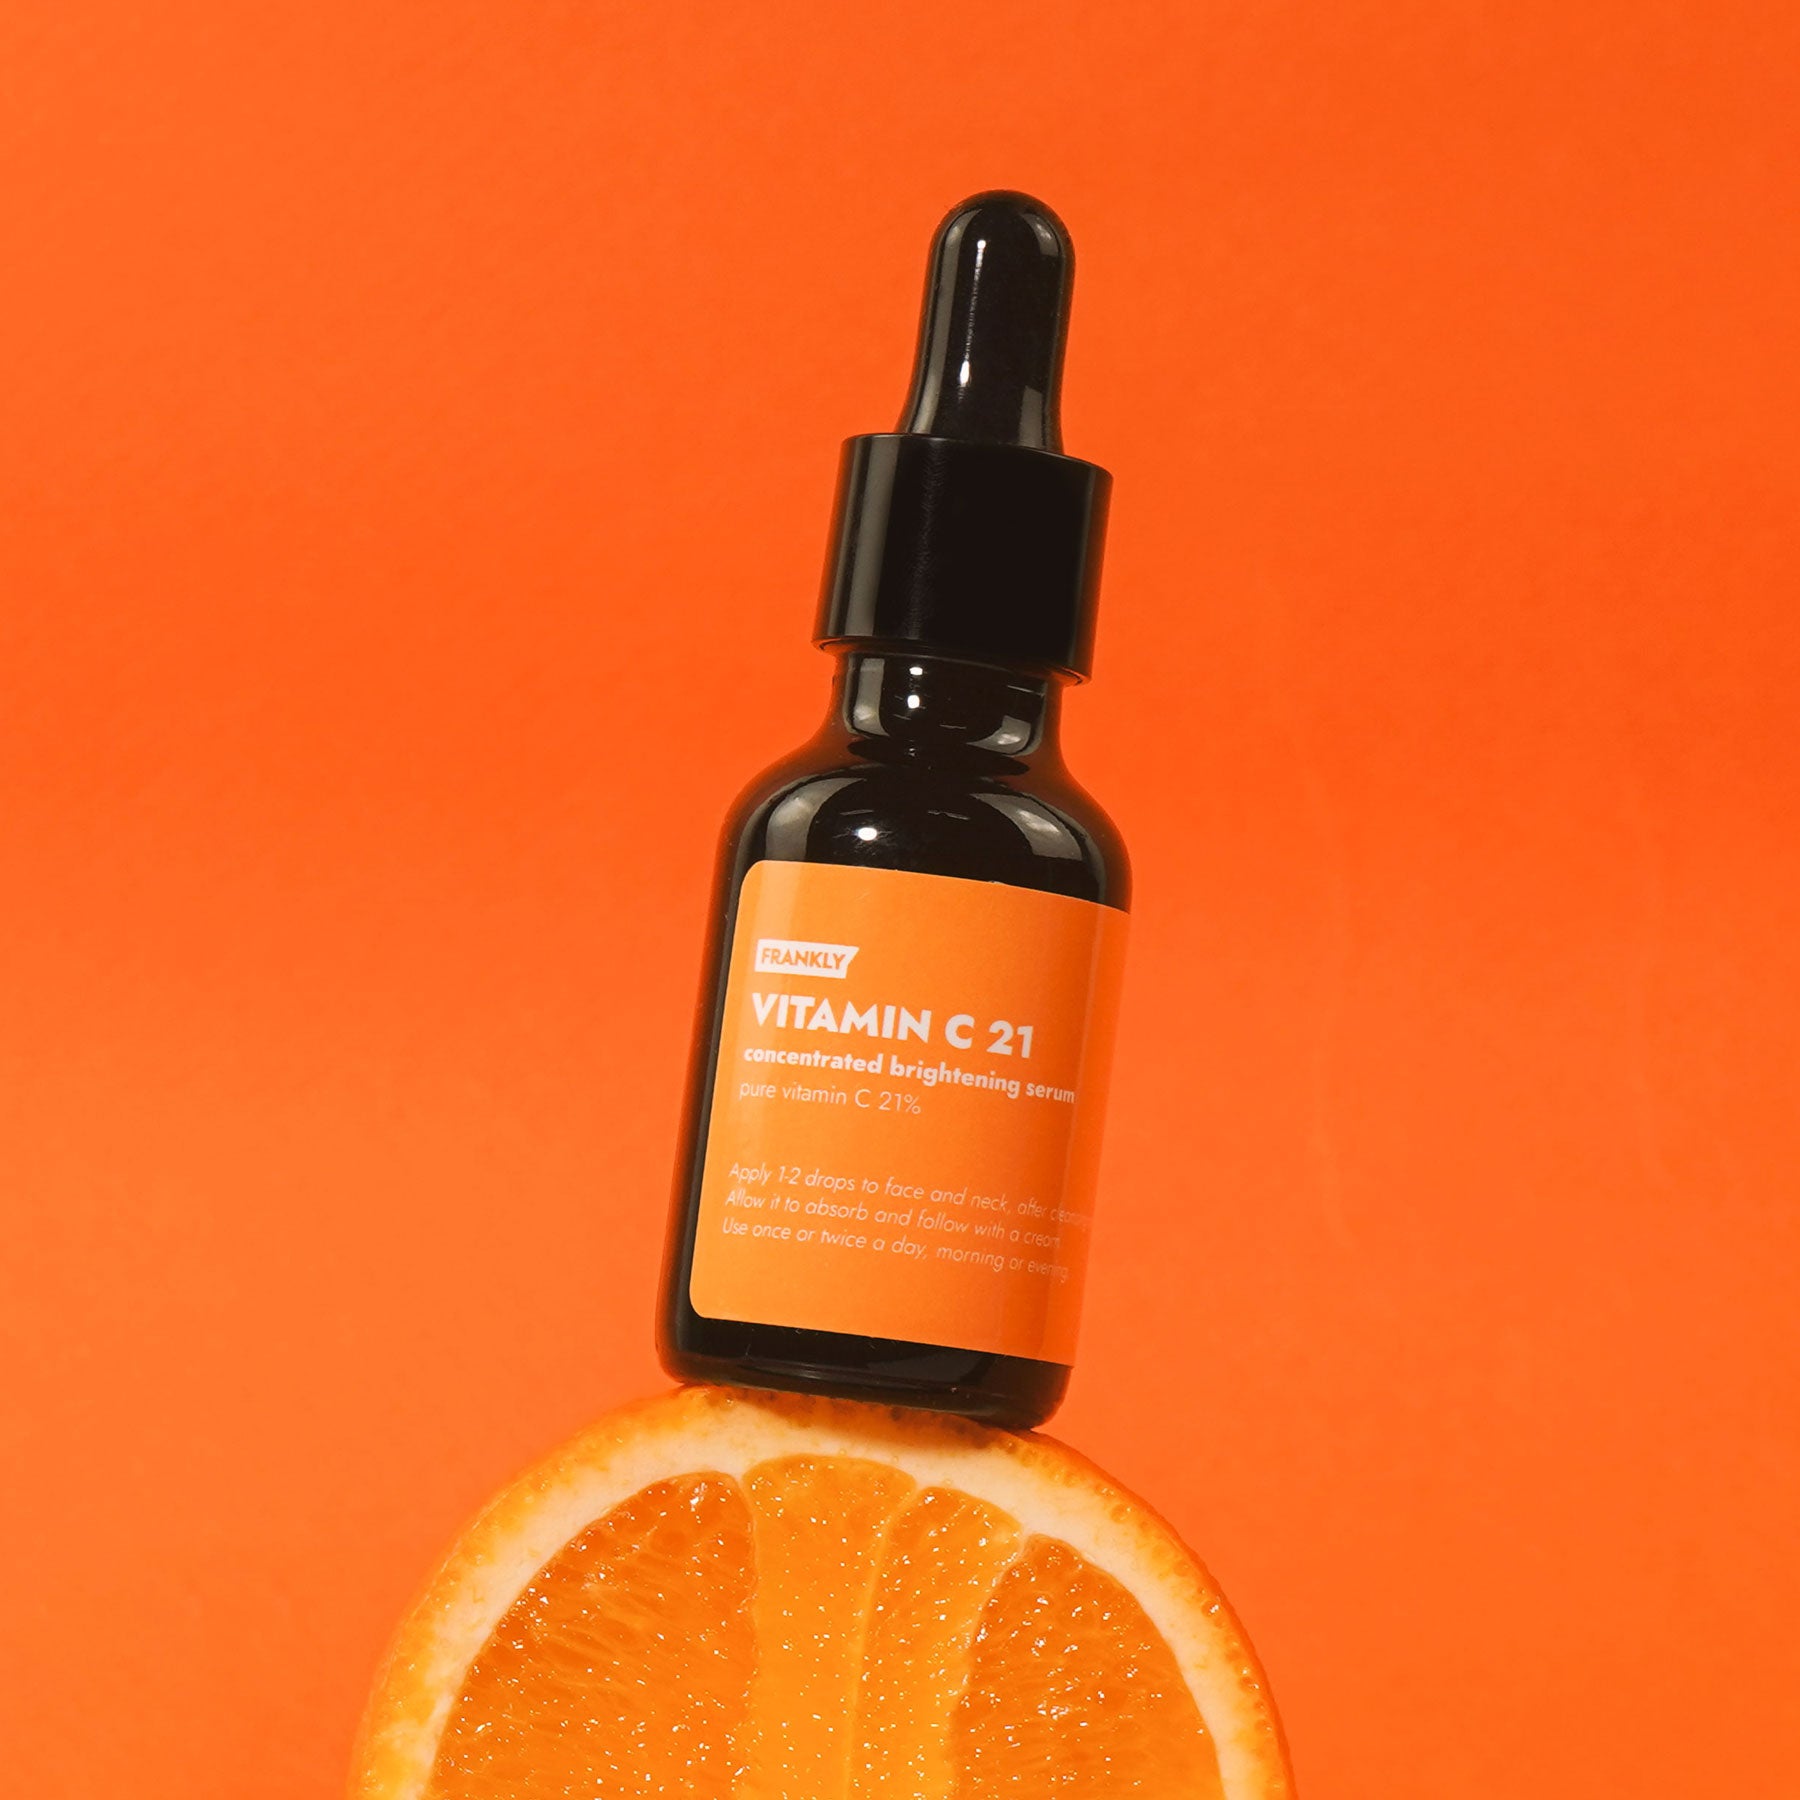 FRANKLY Vitamin C 21% Concentrated Brightening Serum 15ml